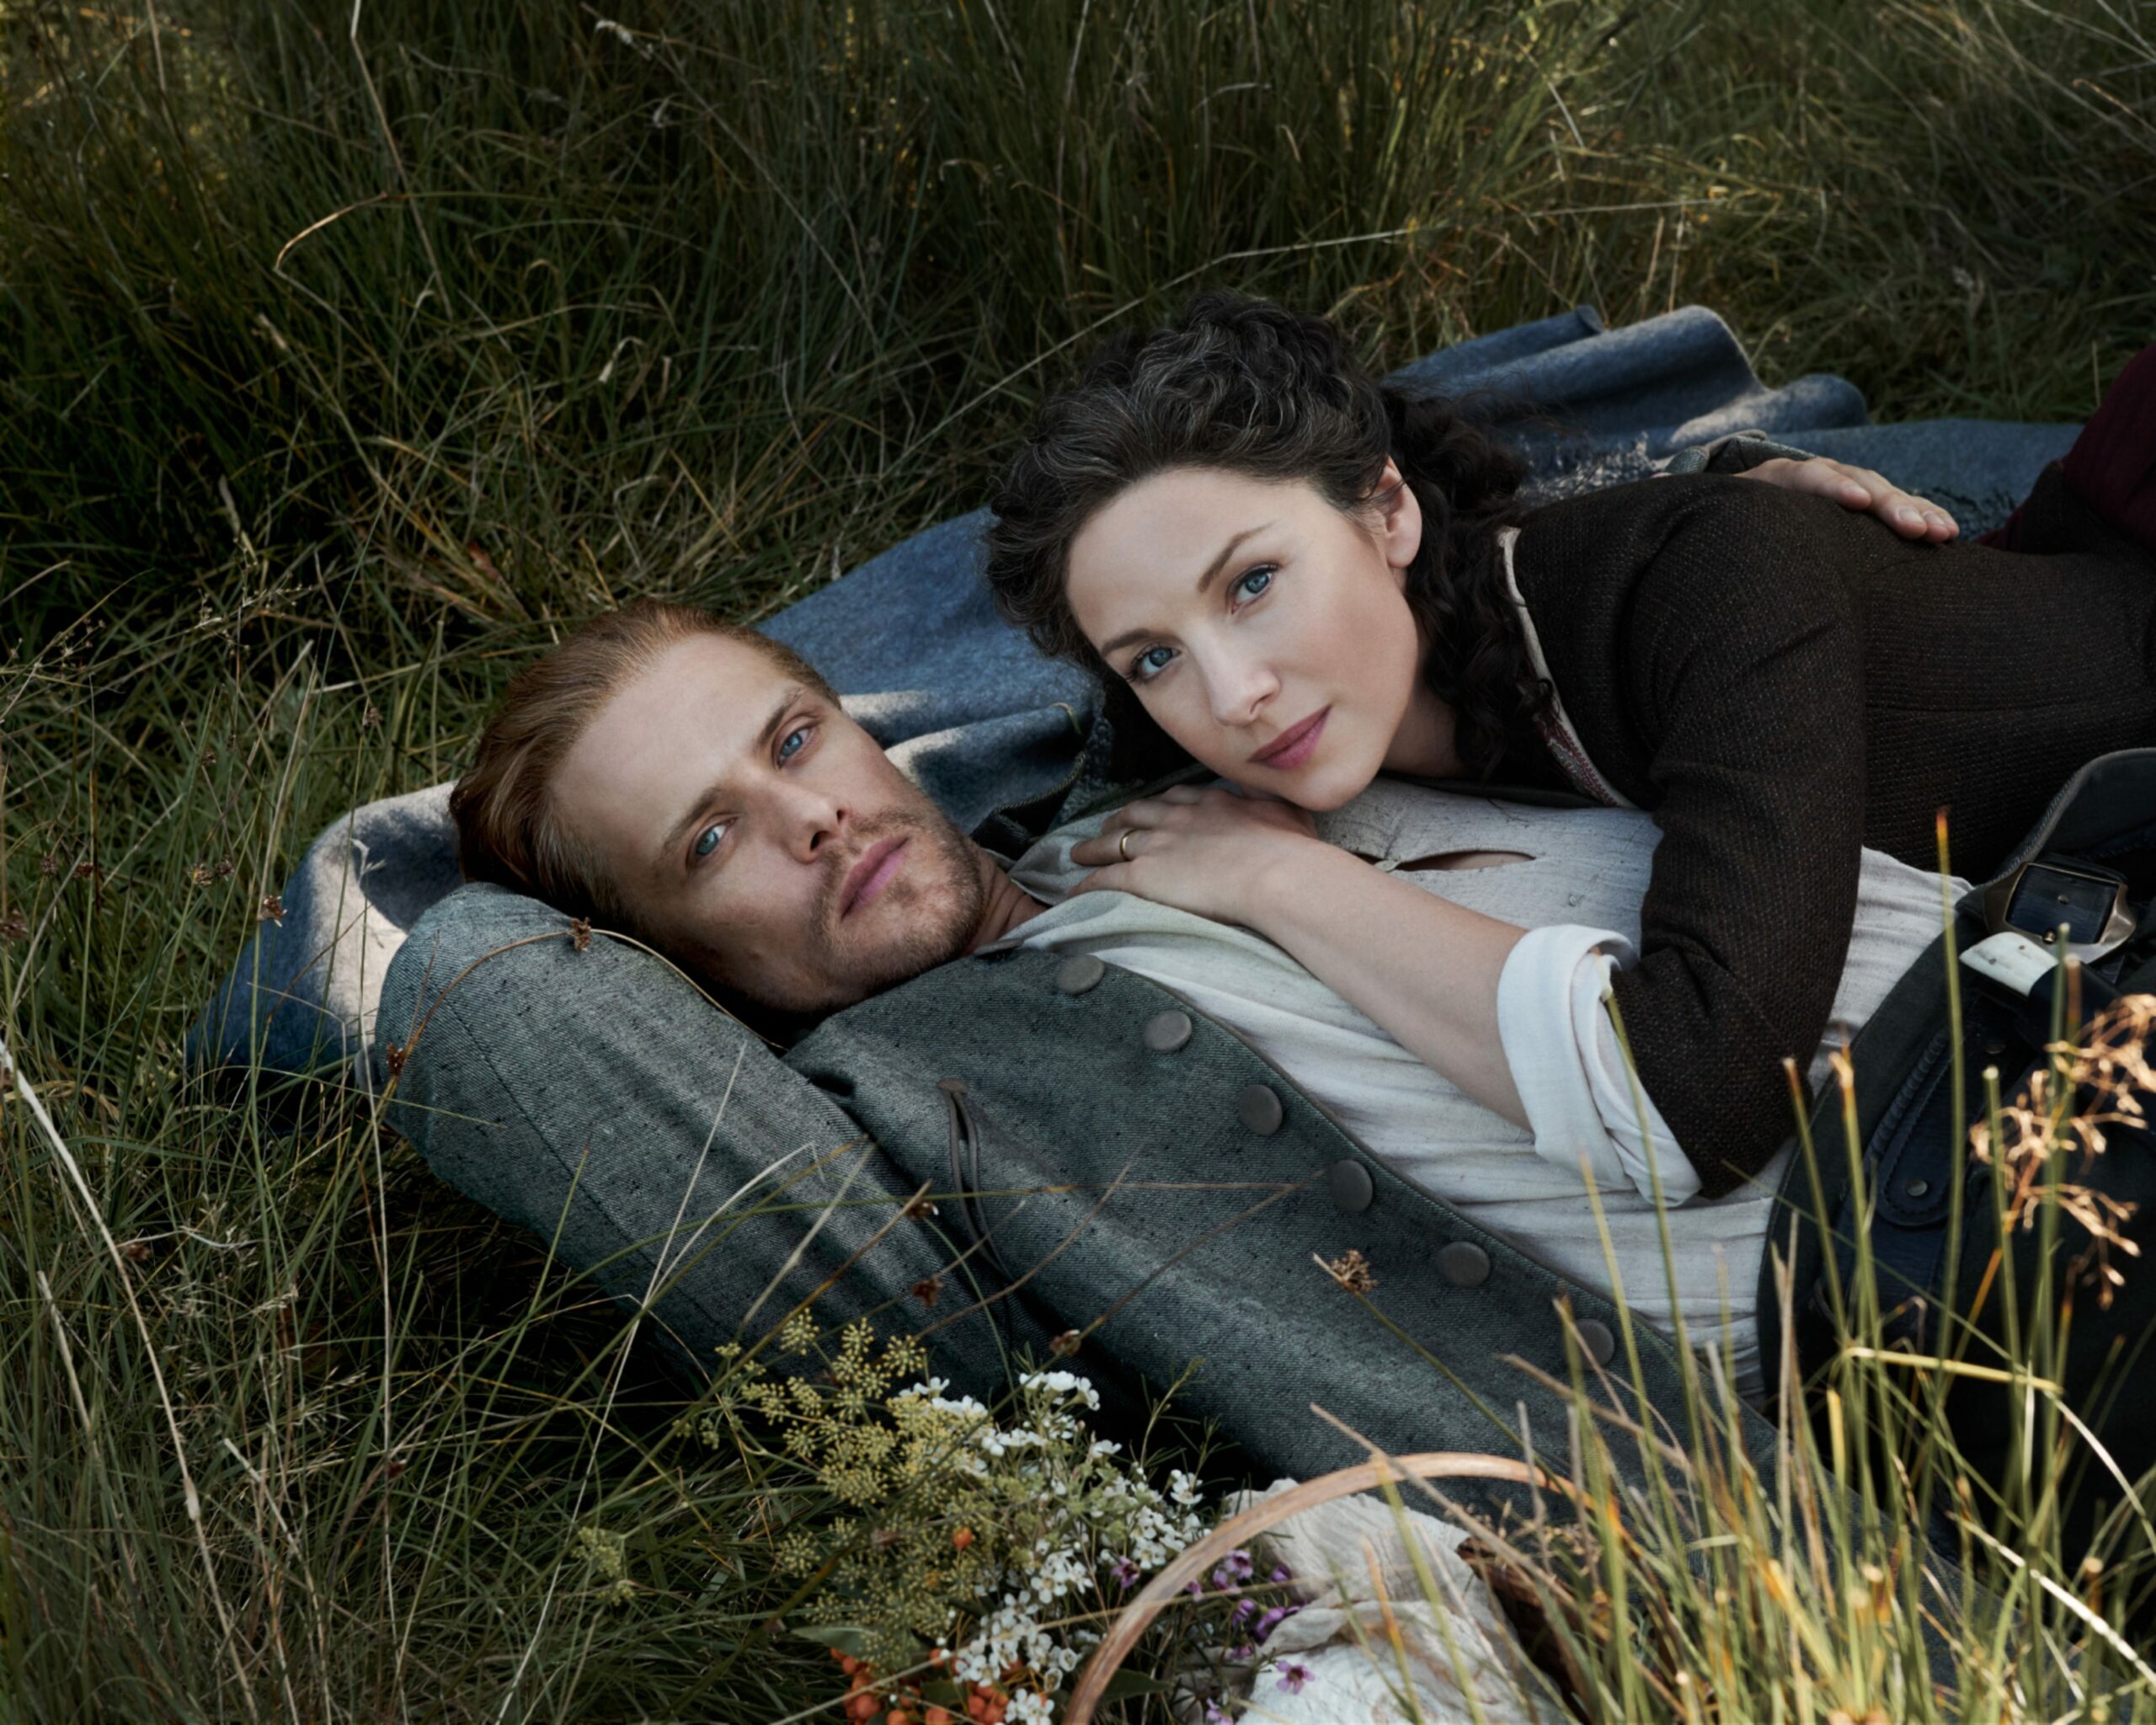 Outlander characters Claire Randall and Jamie Fraser